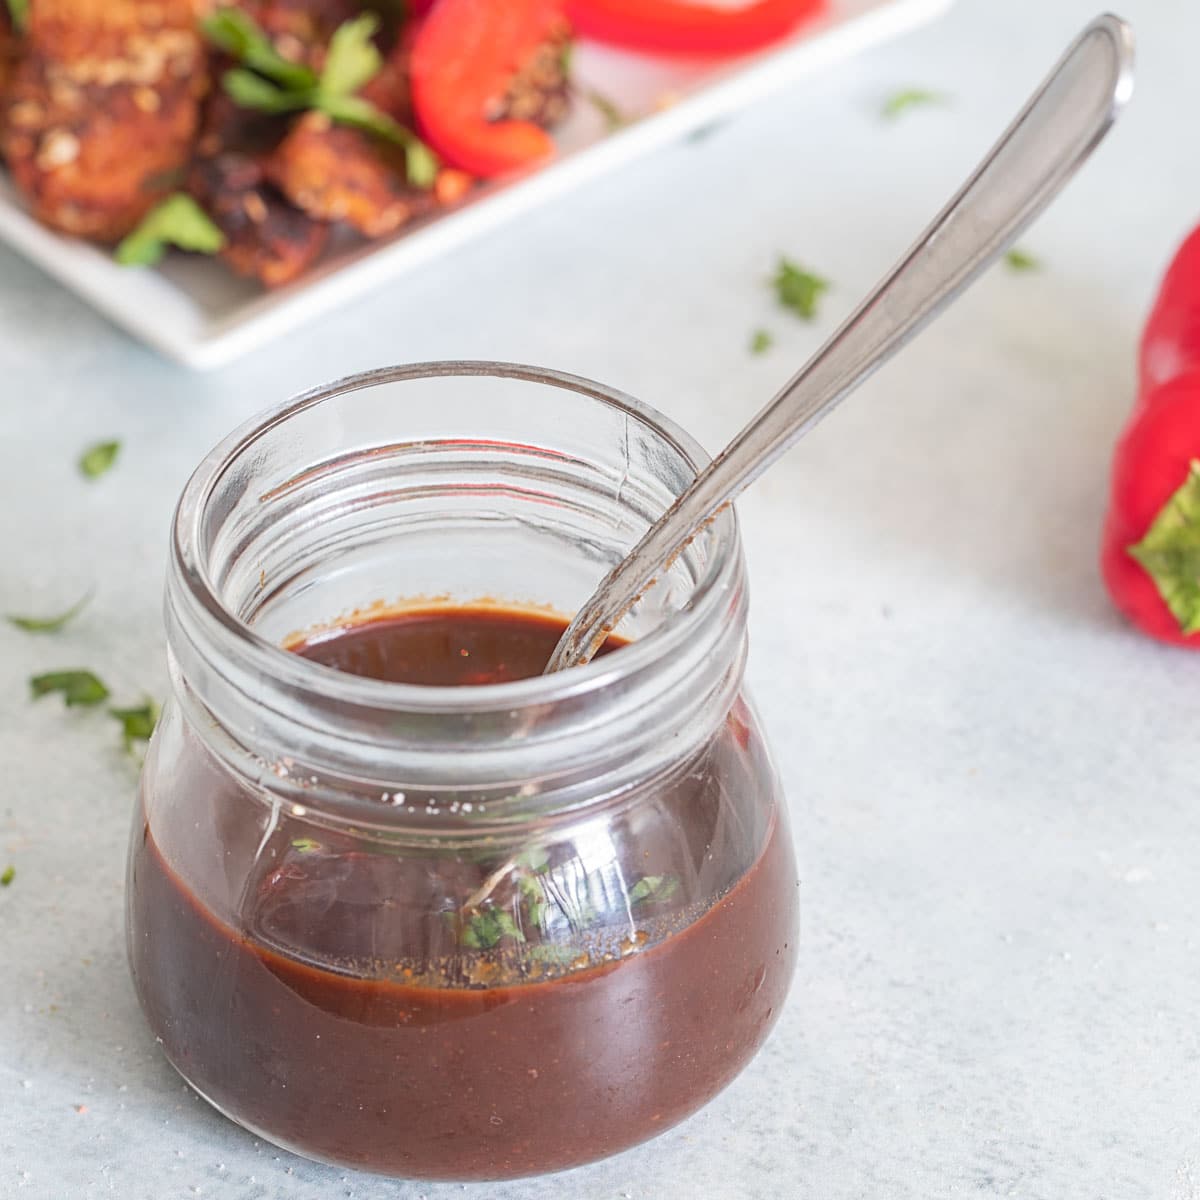 Front view of a glass bottle filled with a brown sauce and a spoon in it.